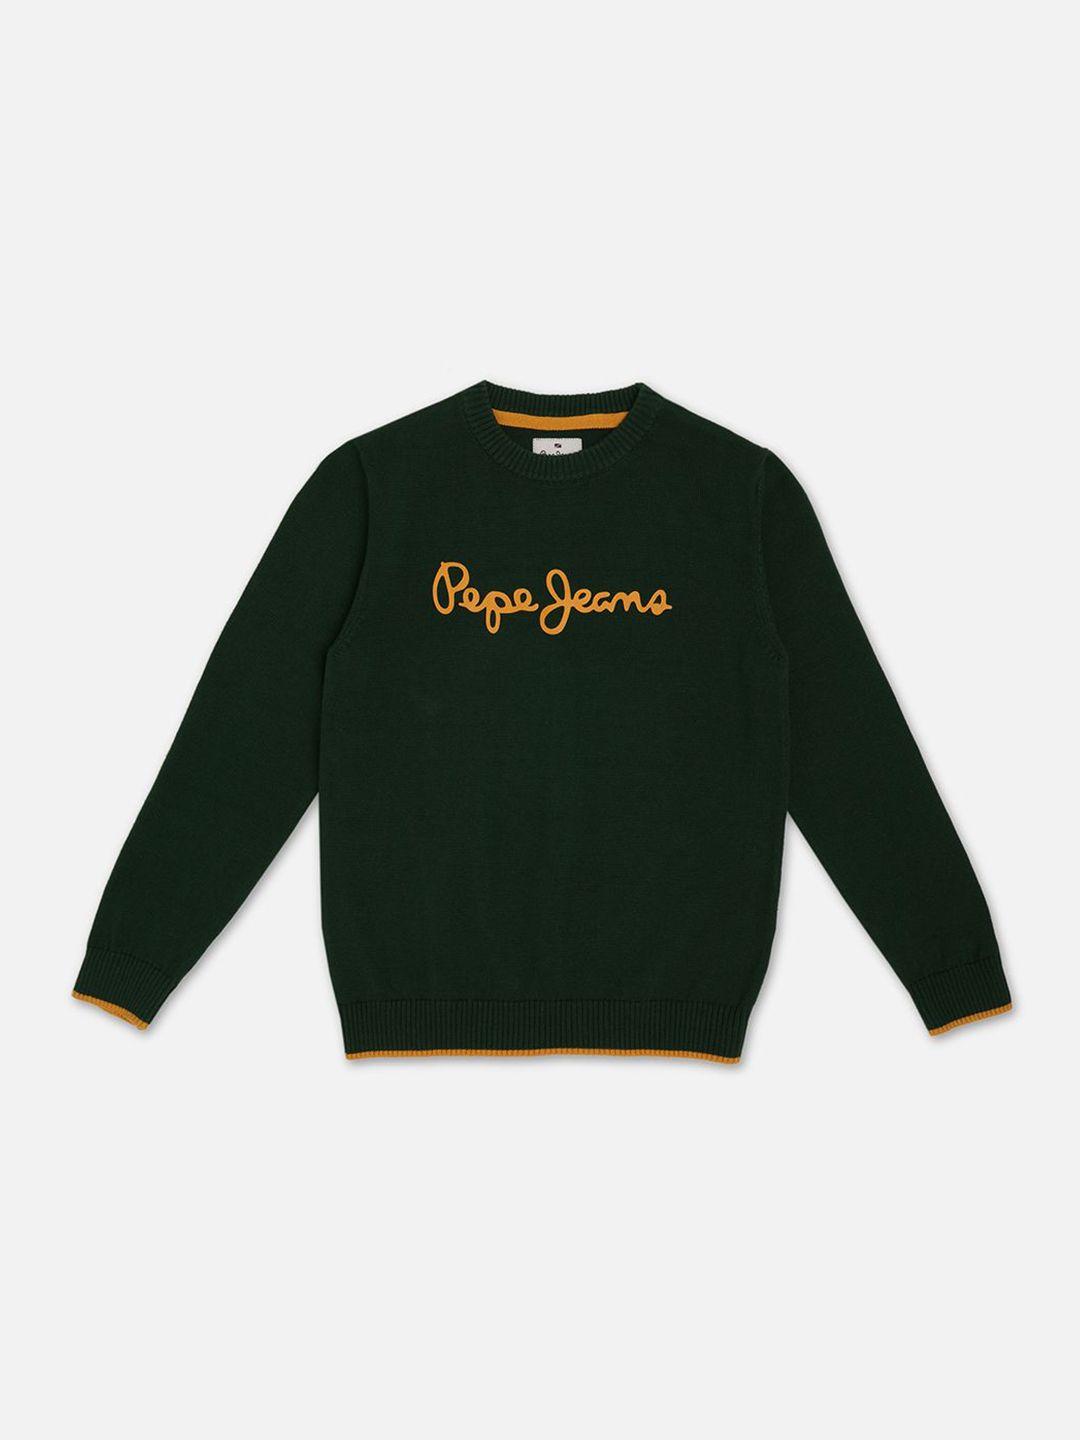 pepe-jeans-boys-brand-logo-printed-round-neck-cotton-pullover-sweater